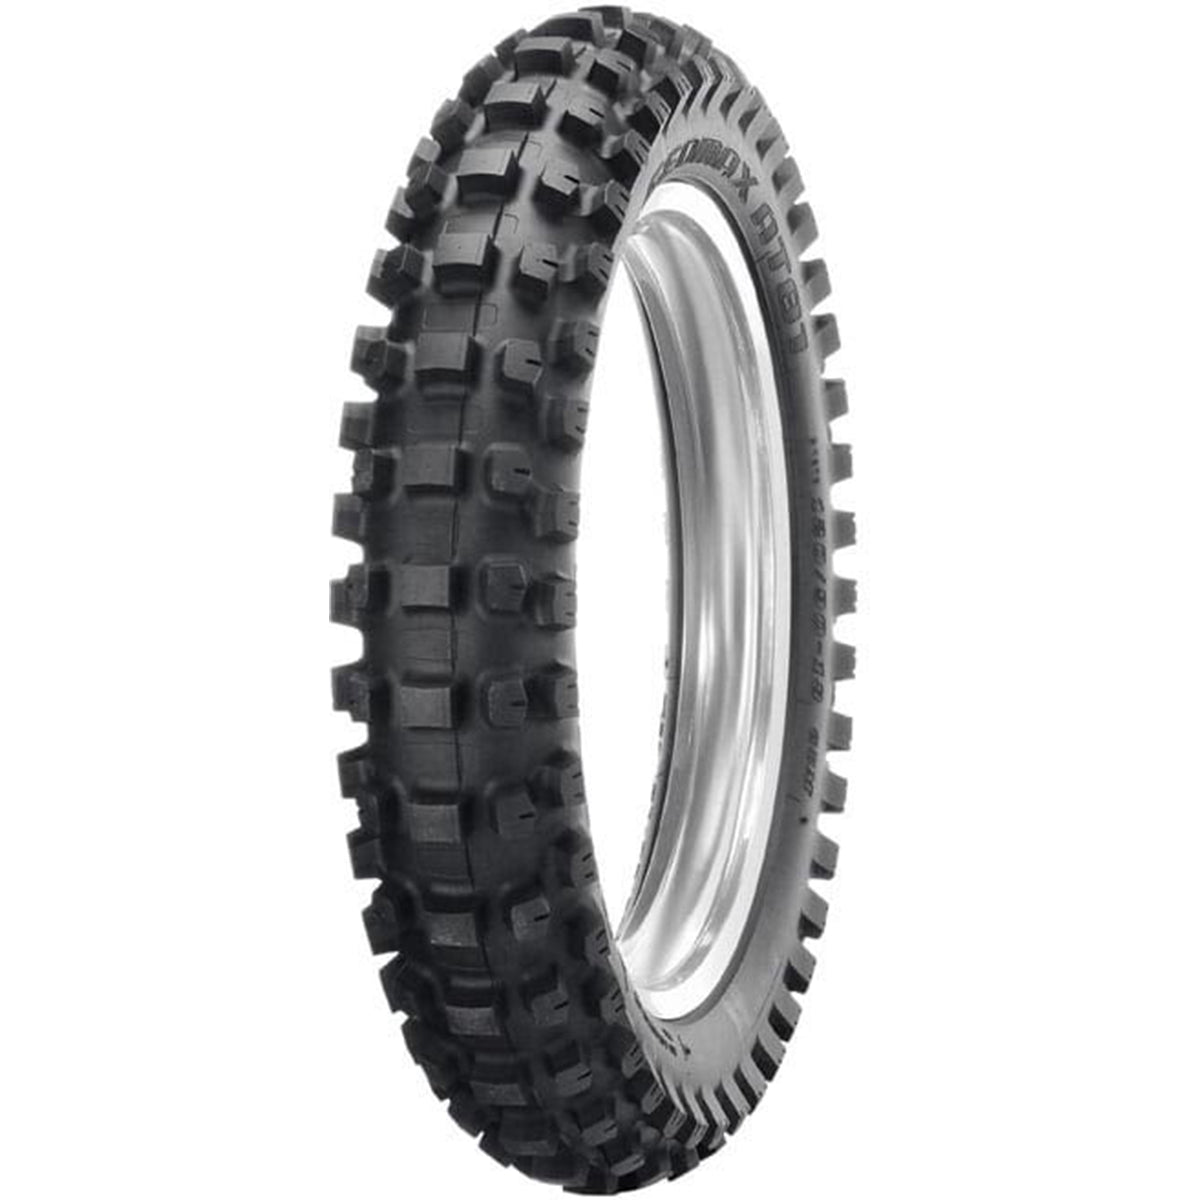 Dunlop Geomax AT81 Dessert 18" Rear Off-Road Tires-0313